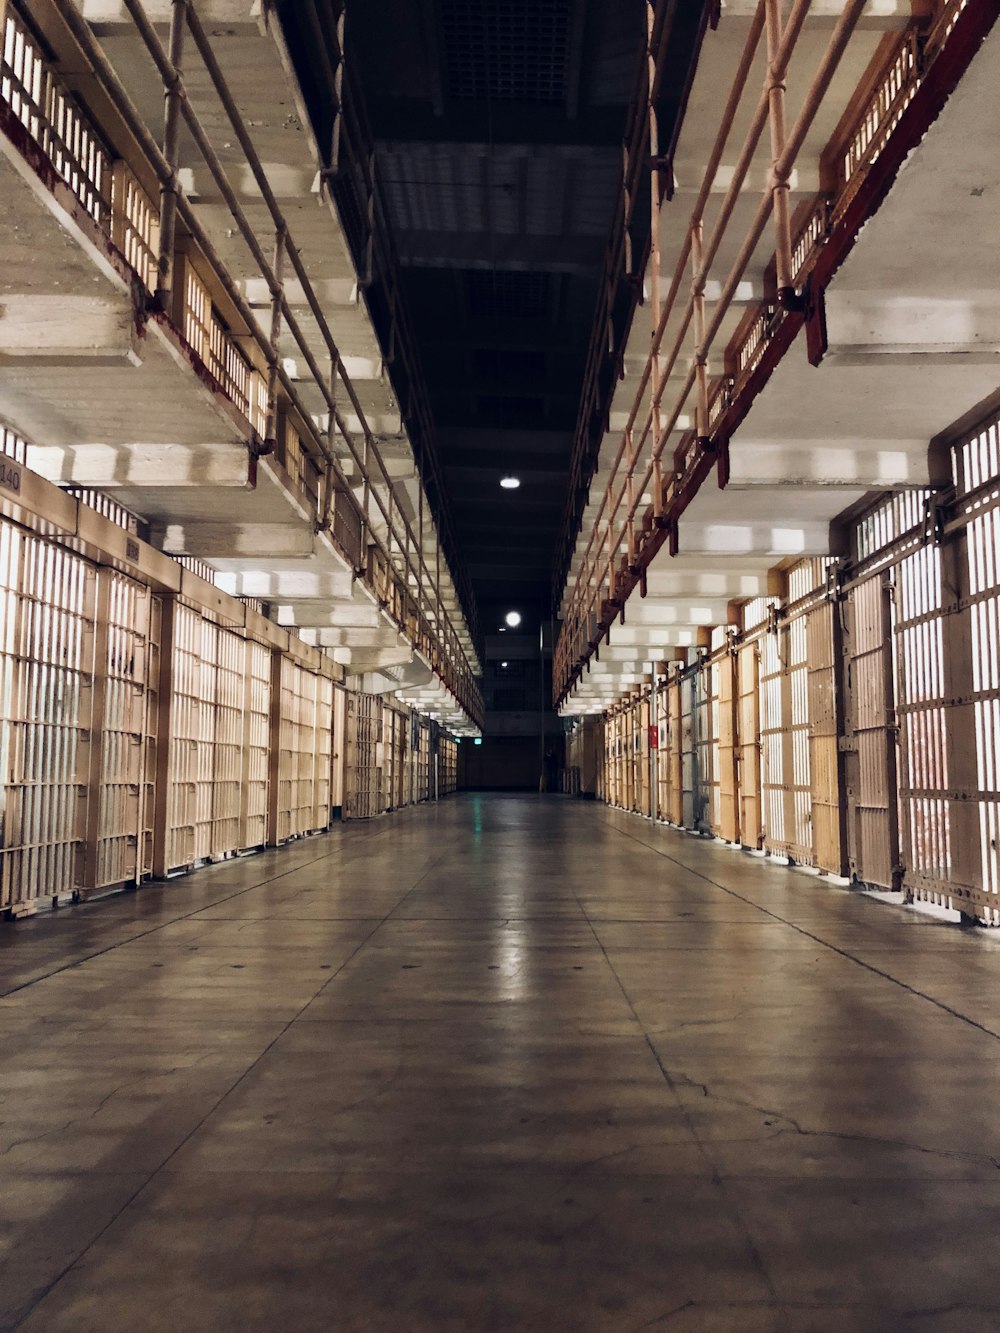 100+ Jail Pictures | Download Free Images & Stock Photos on Unsplash